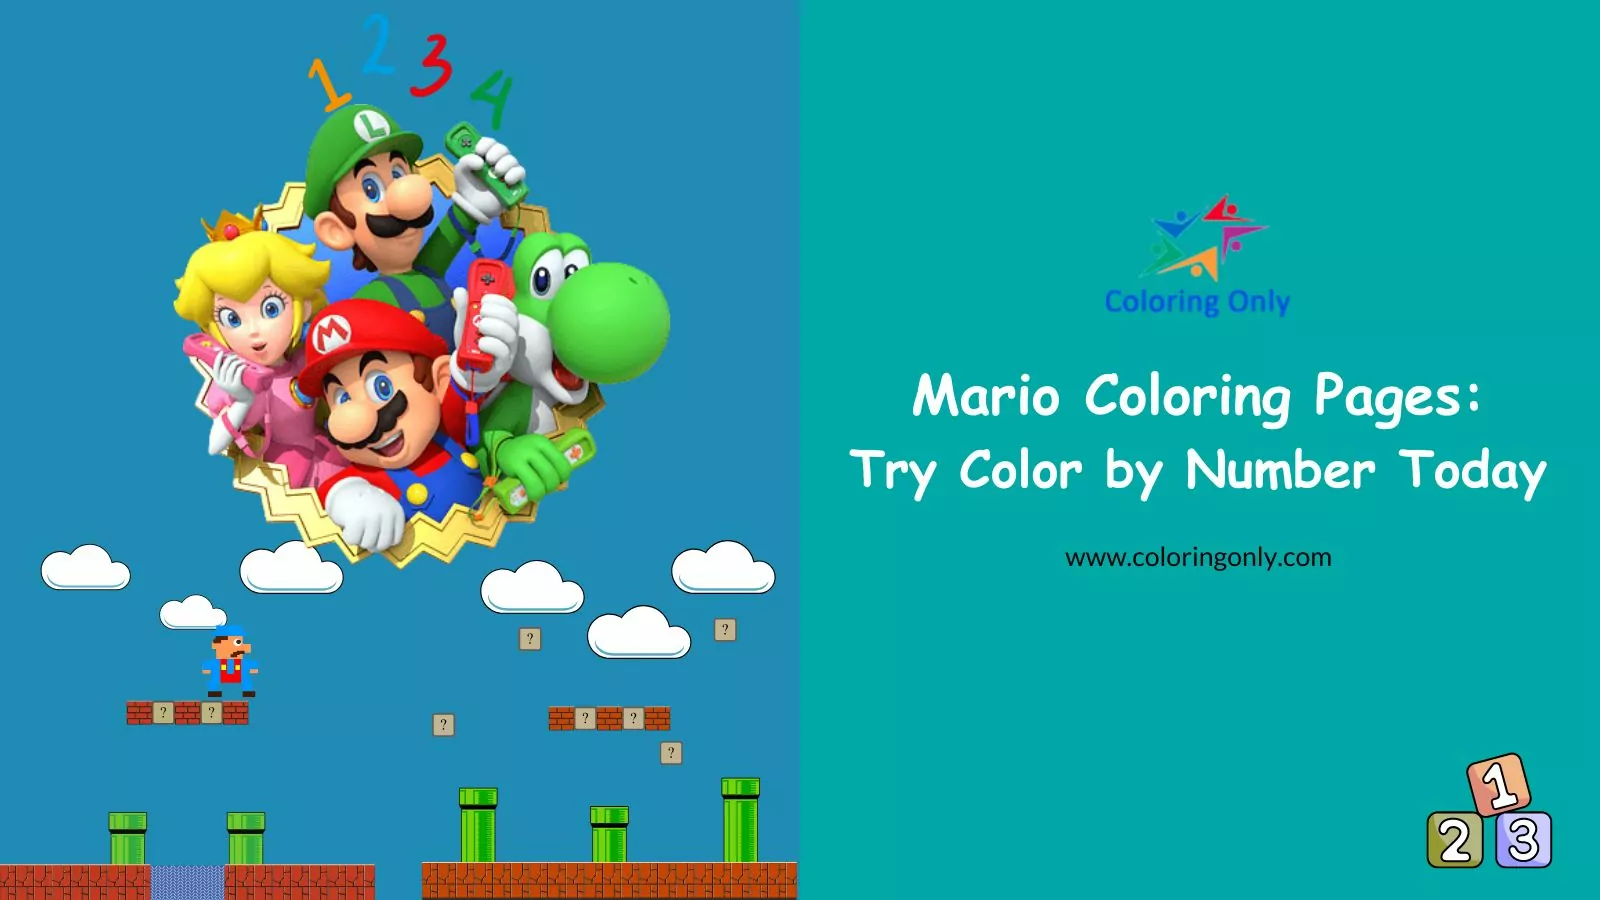 Mario Coloring Pages: Try Color by Number Today